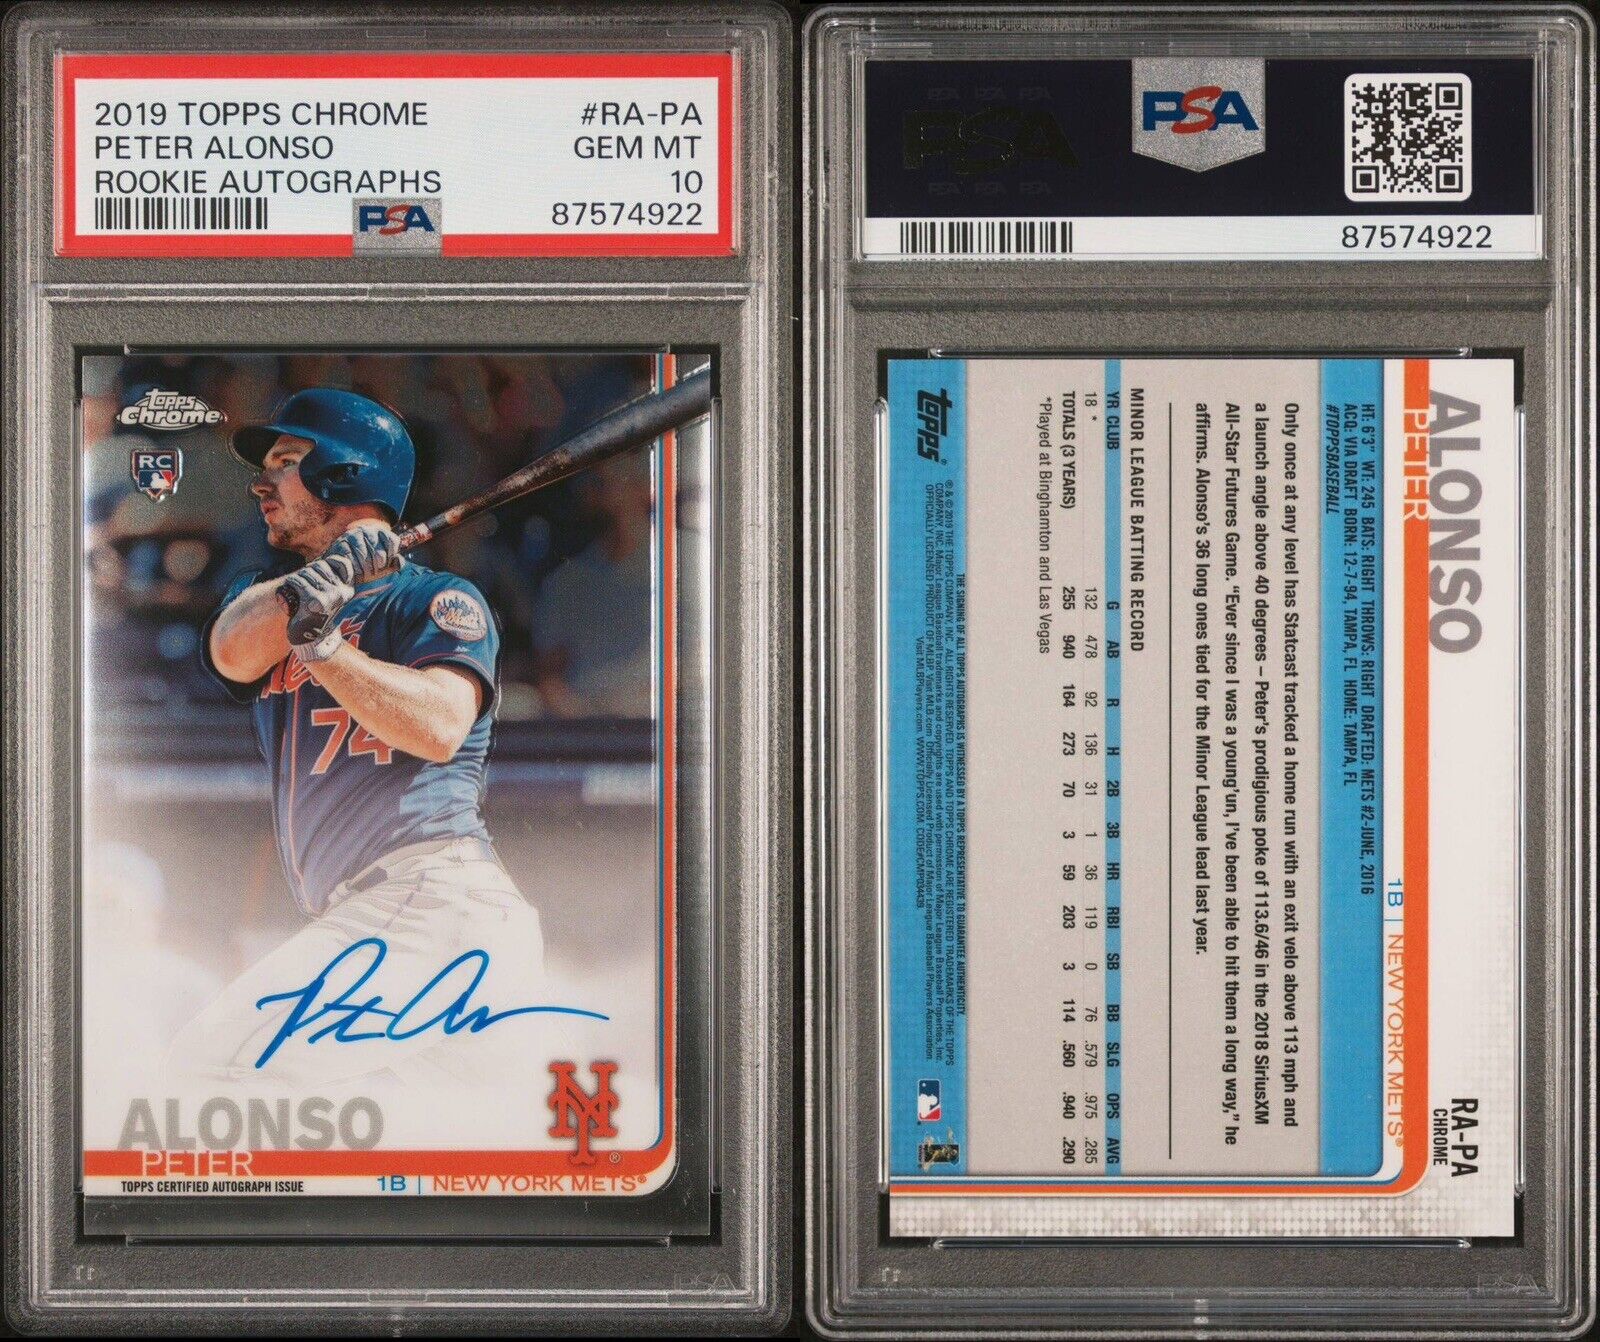 2019 Topps Chrome PETER PETE ALONSO Rookie Auto PSA 10 GEM MINT New York Mets RC